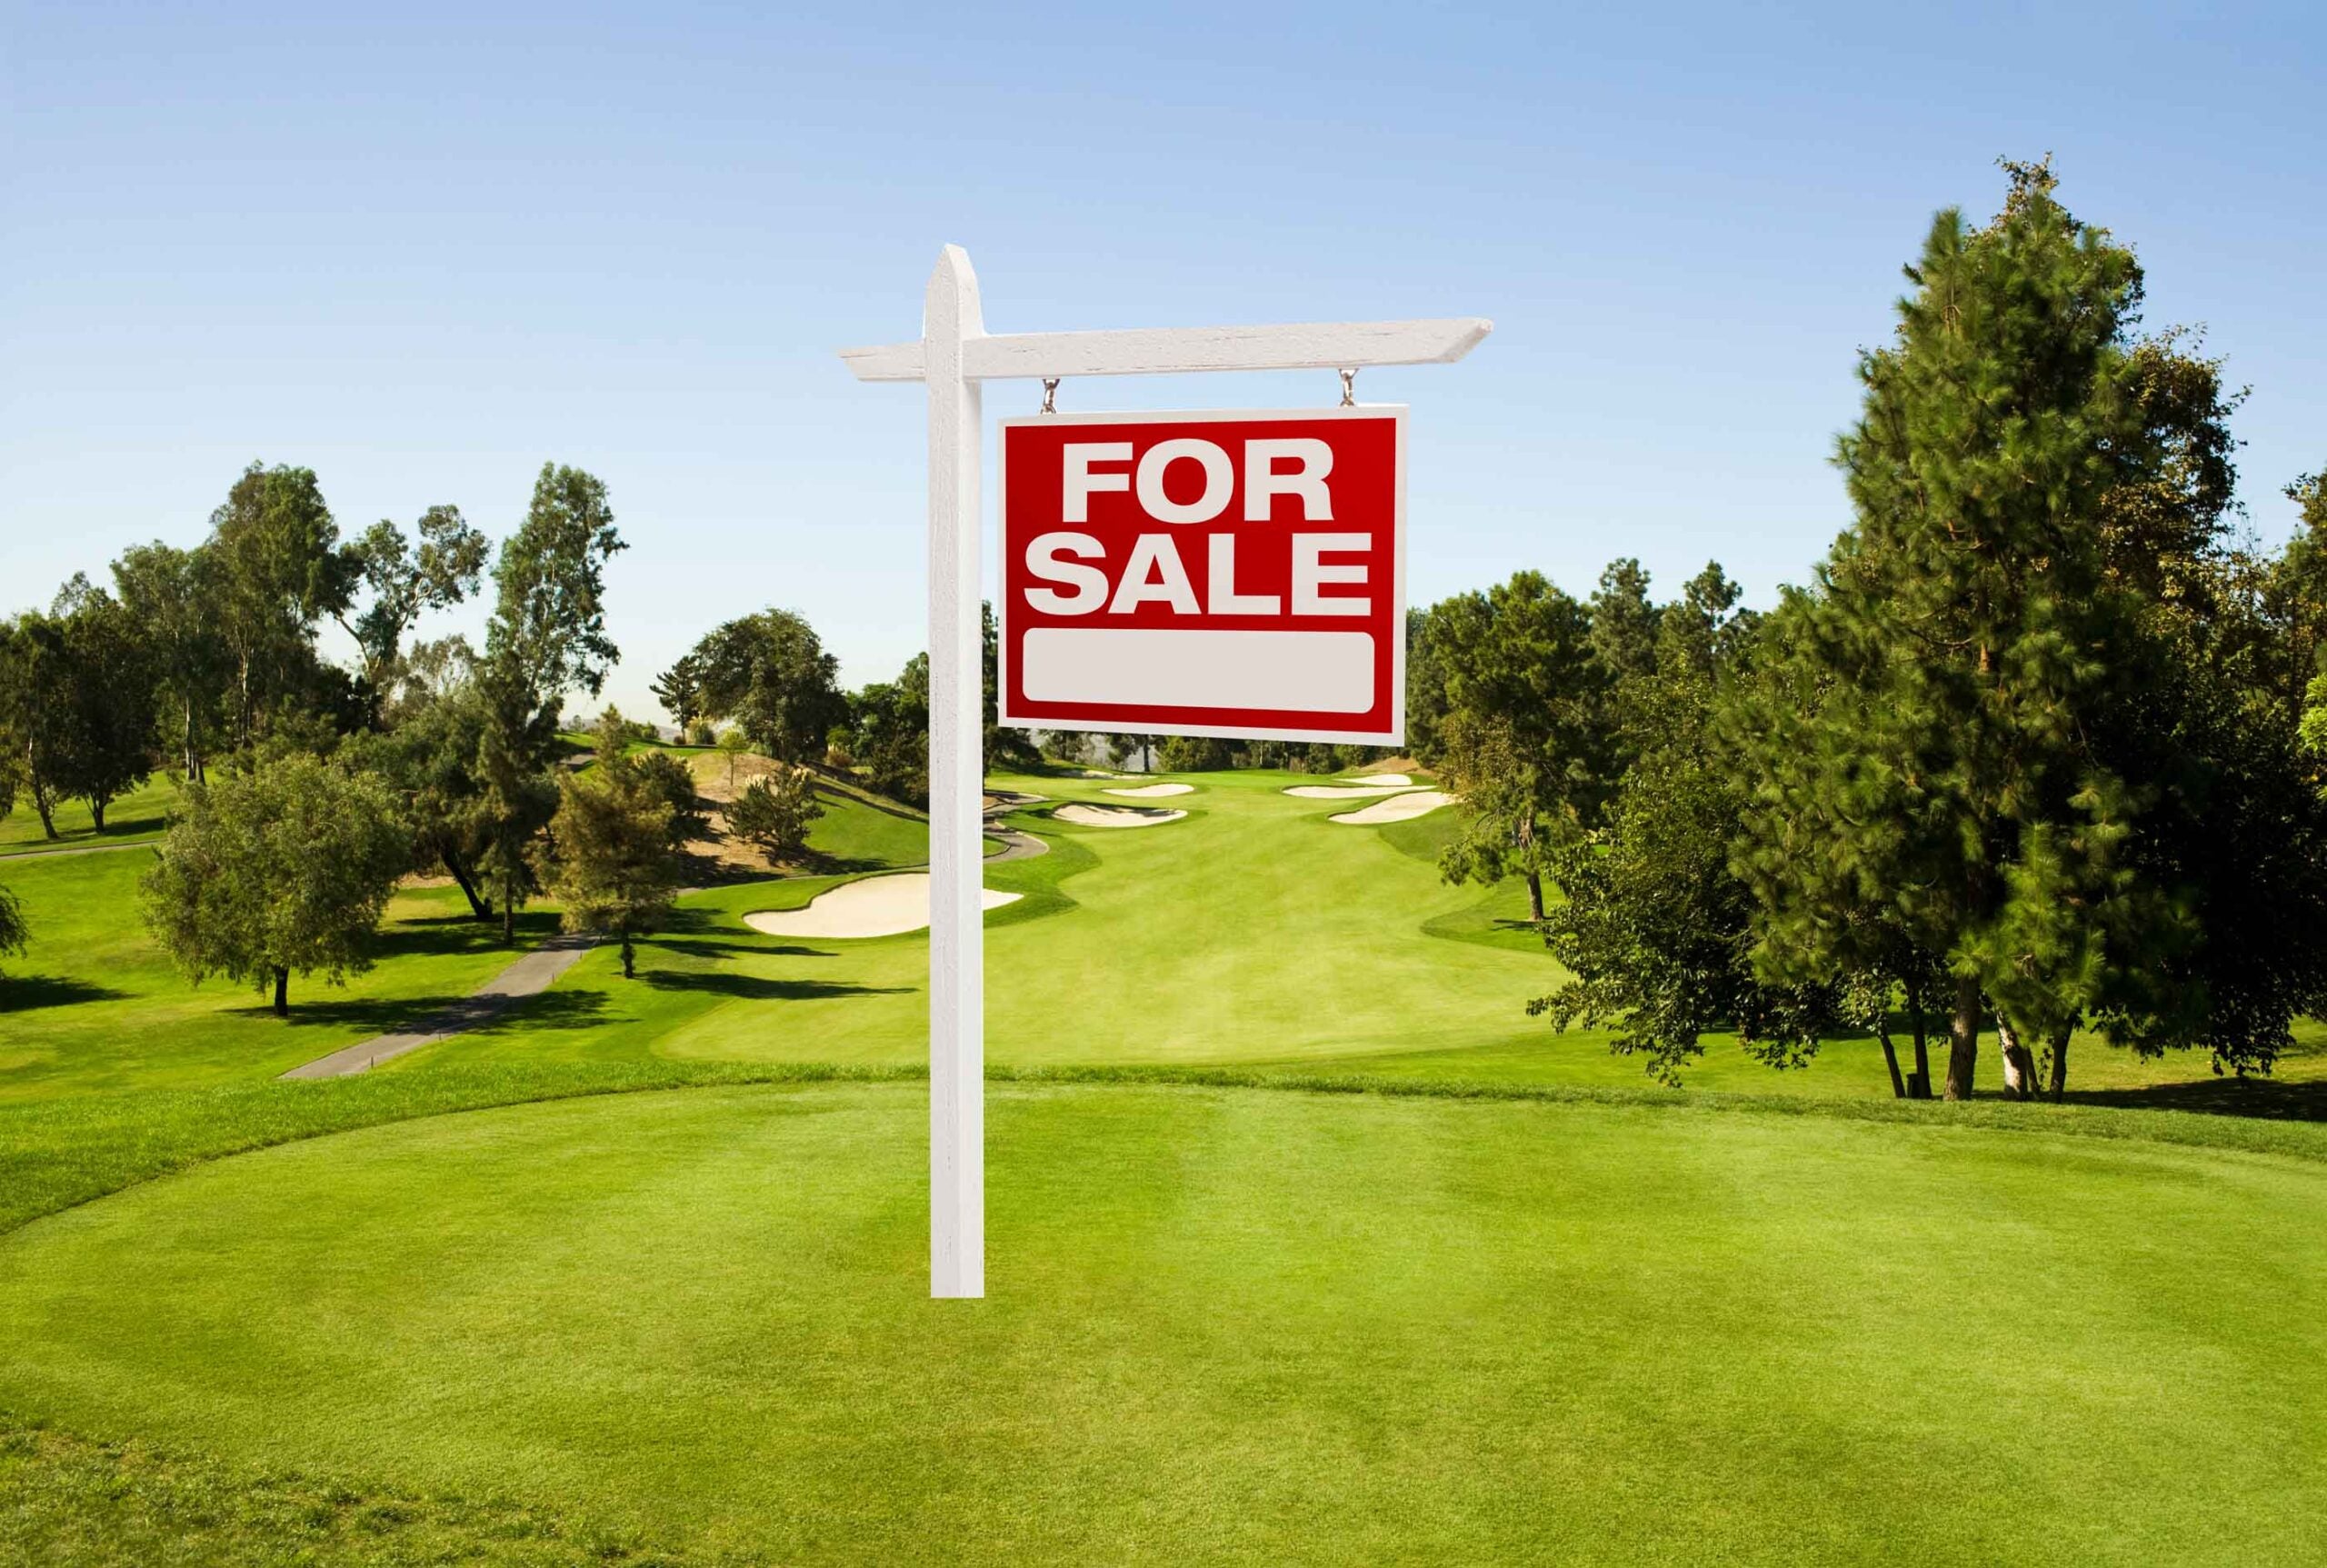 The dos and don’ts of buying a golf course, according to experts